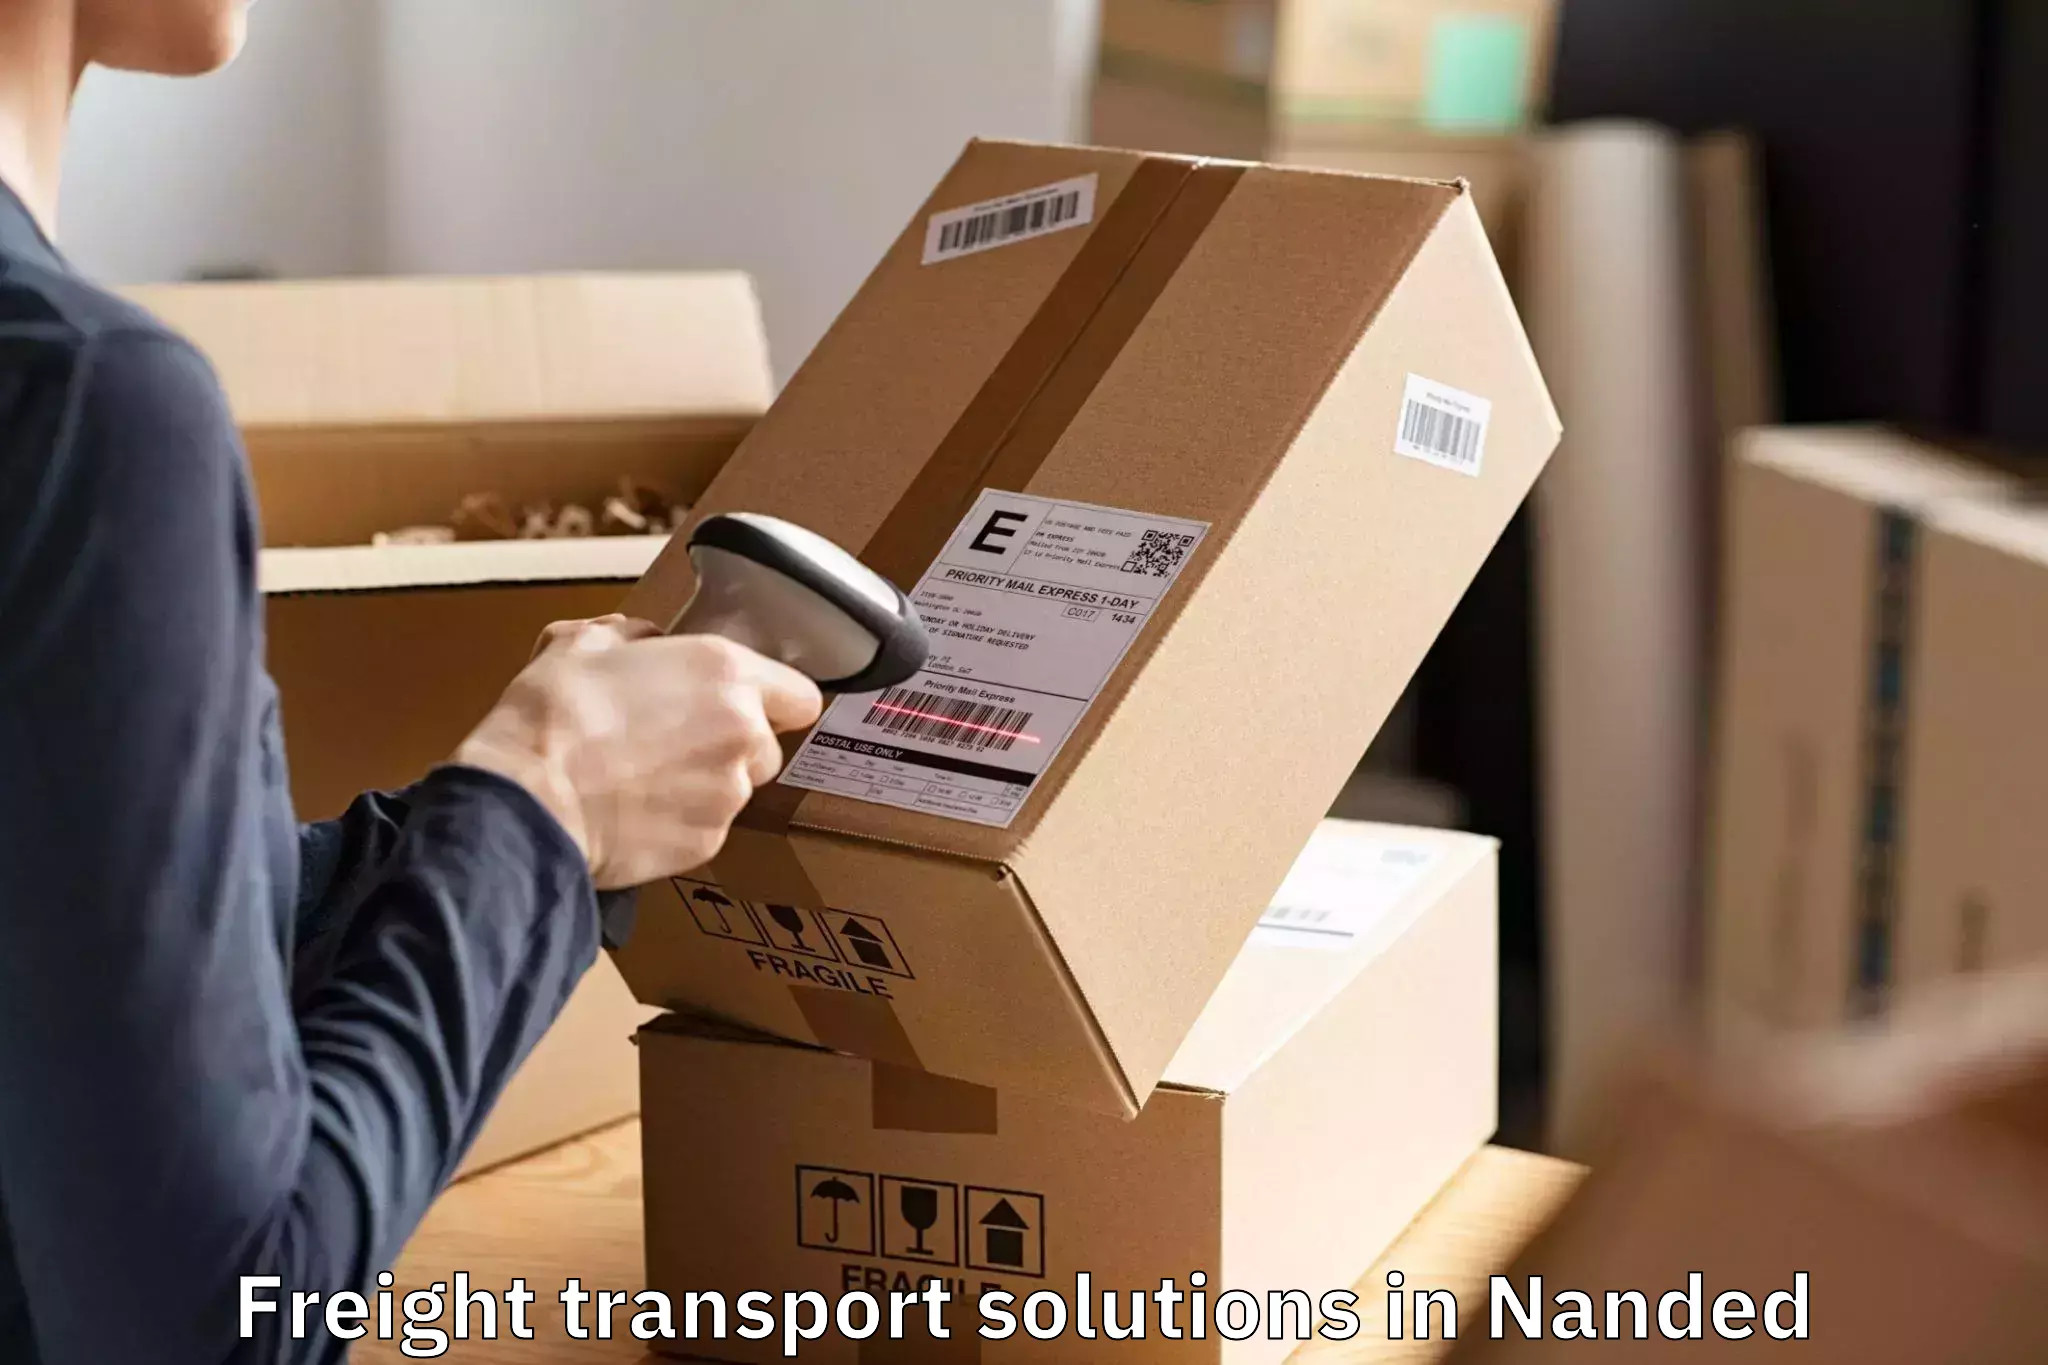 Comprehensive Freight Transport Solutions in Nanded, Maharashtra (MH)